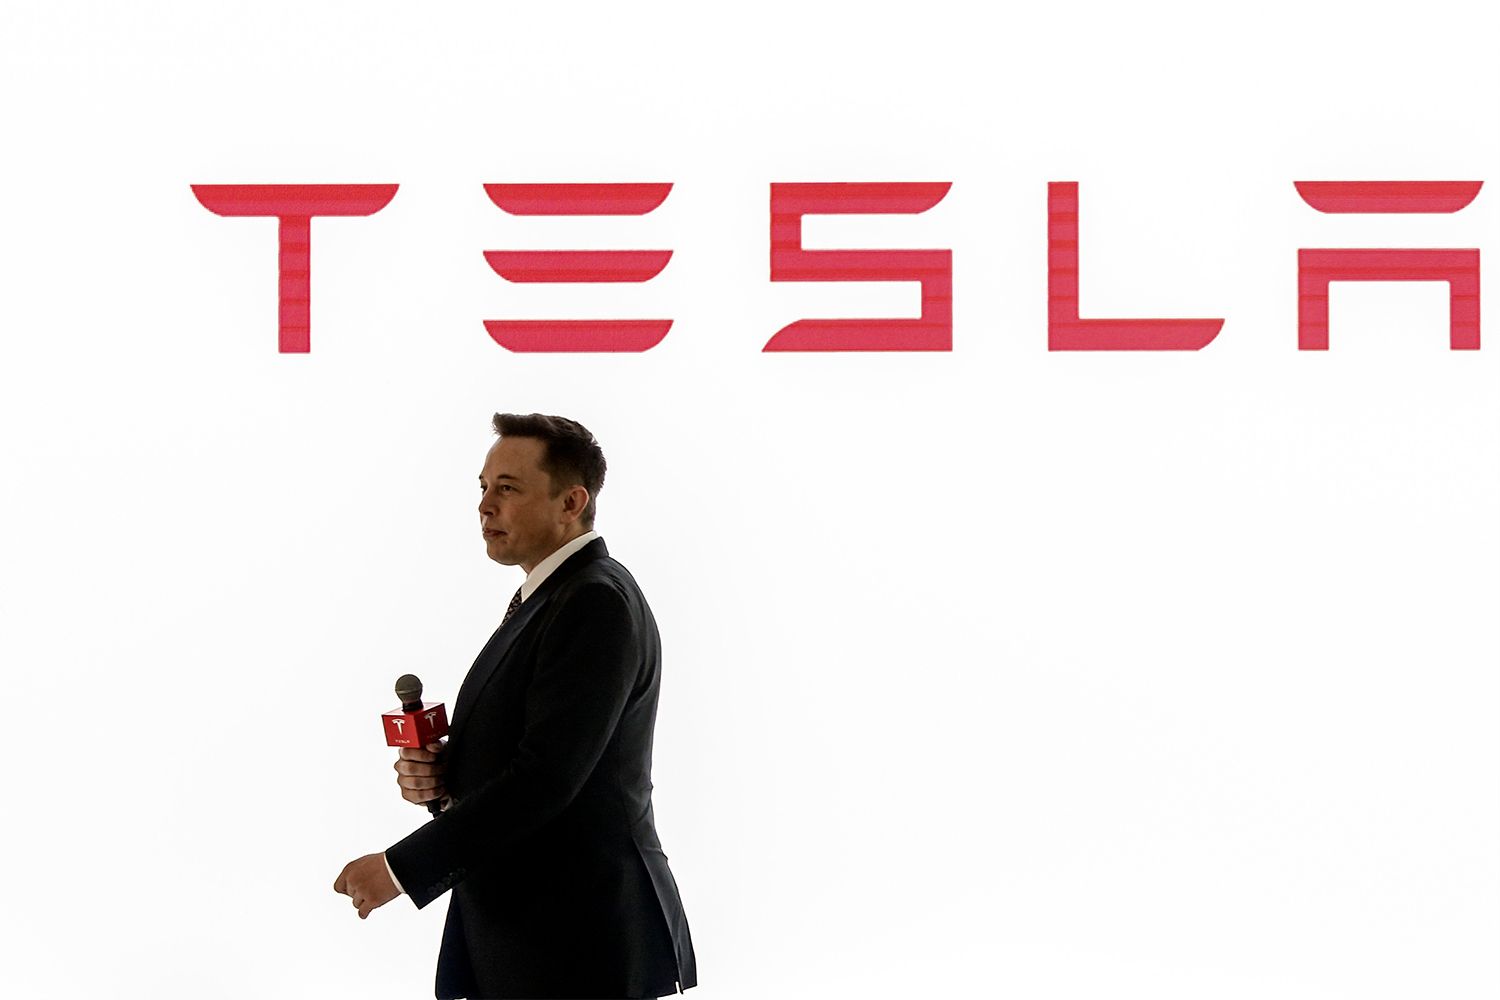 Tesla CEO Elon Musk in Beijing, China promoting the launch of the first Autopilot features in October 2015.